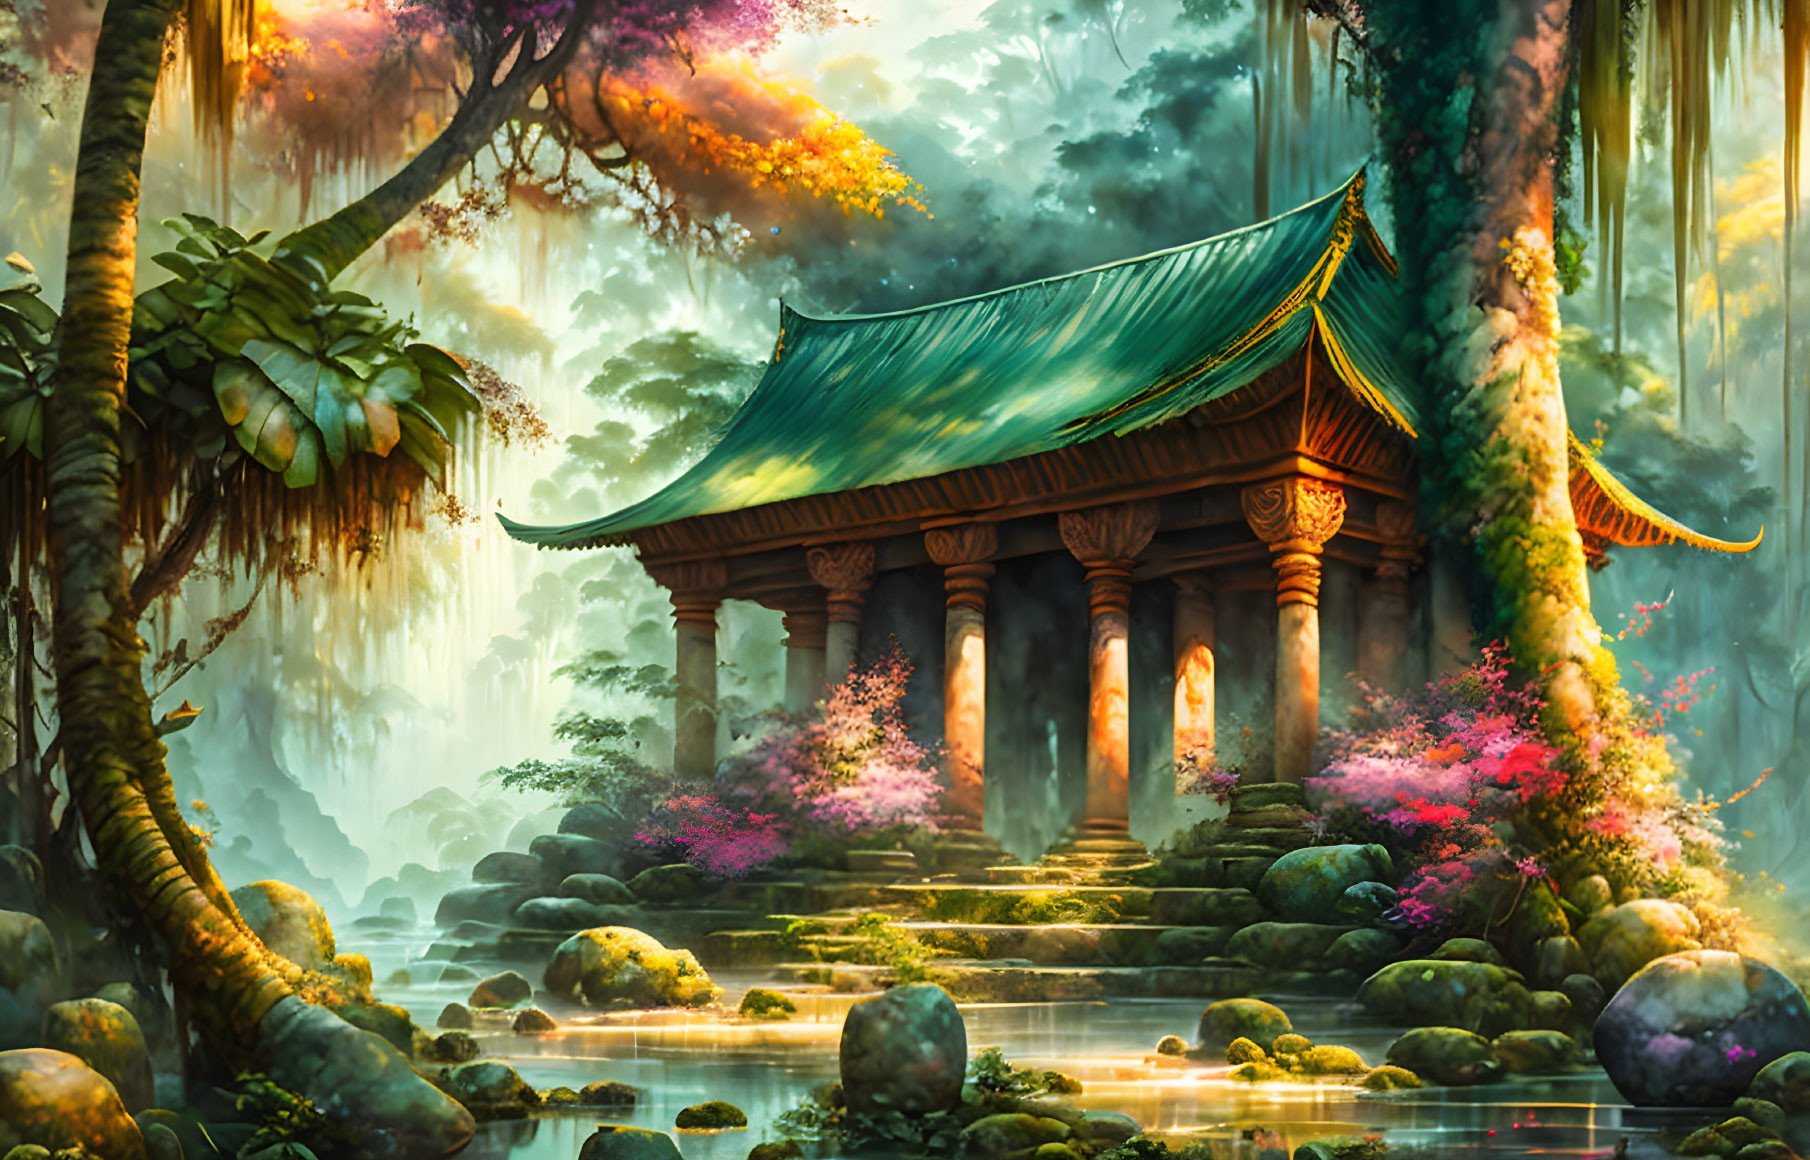 Mystical forest scene with colorful flora, serene pond, and misty ambiance